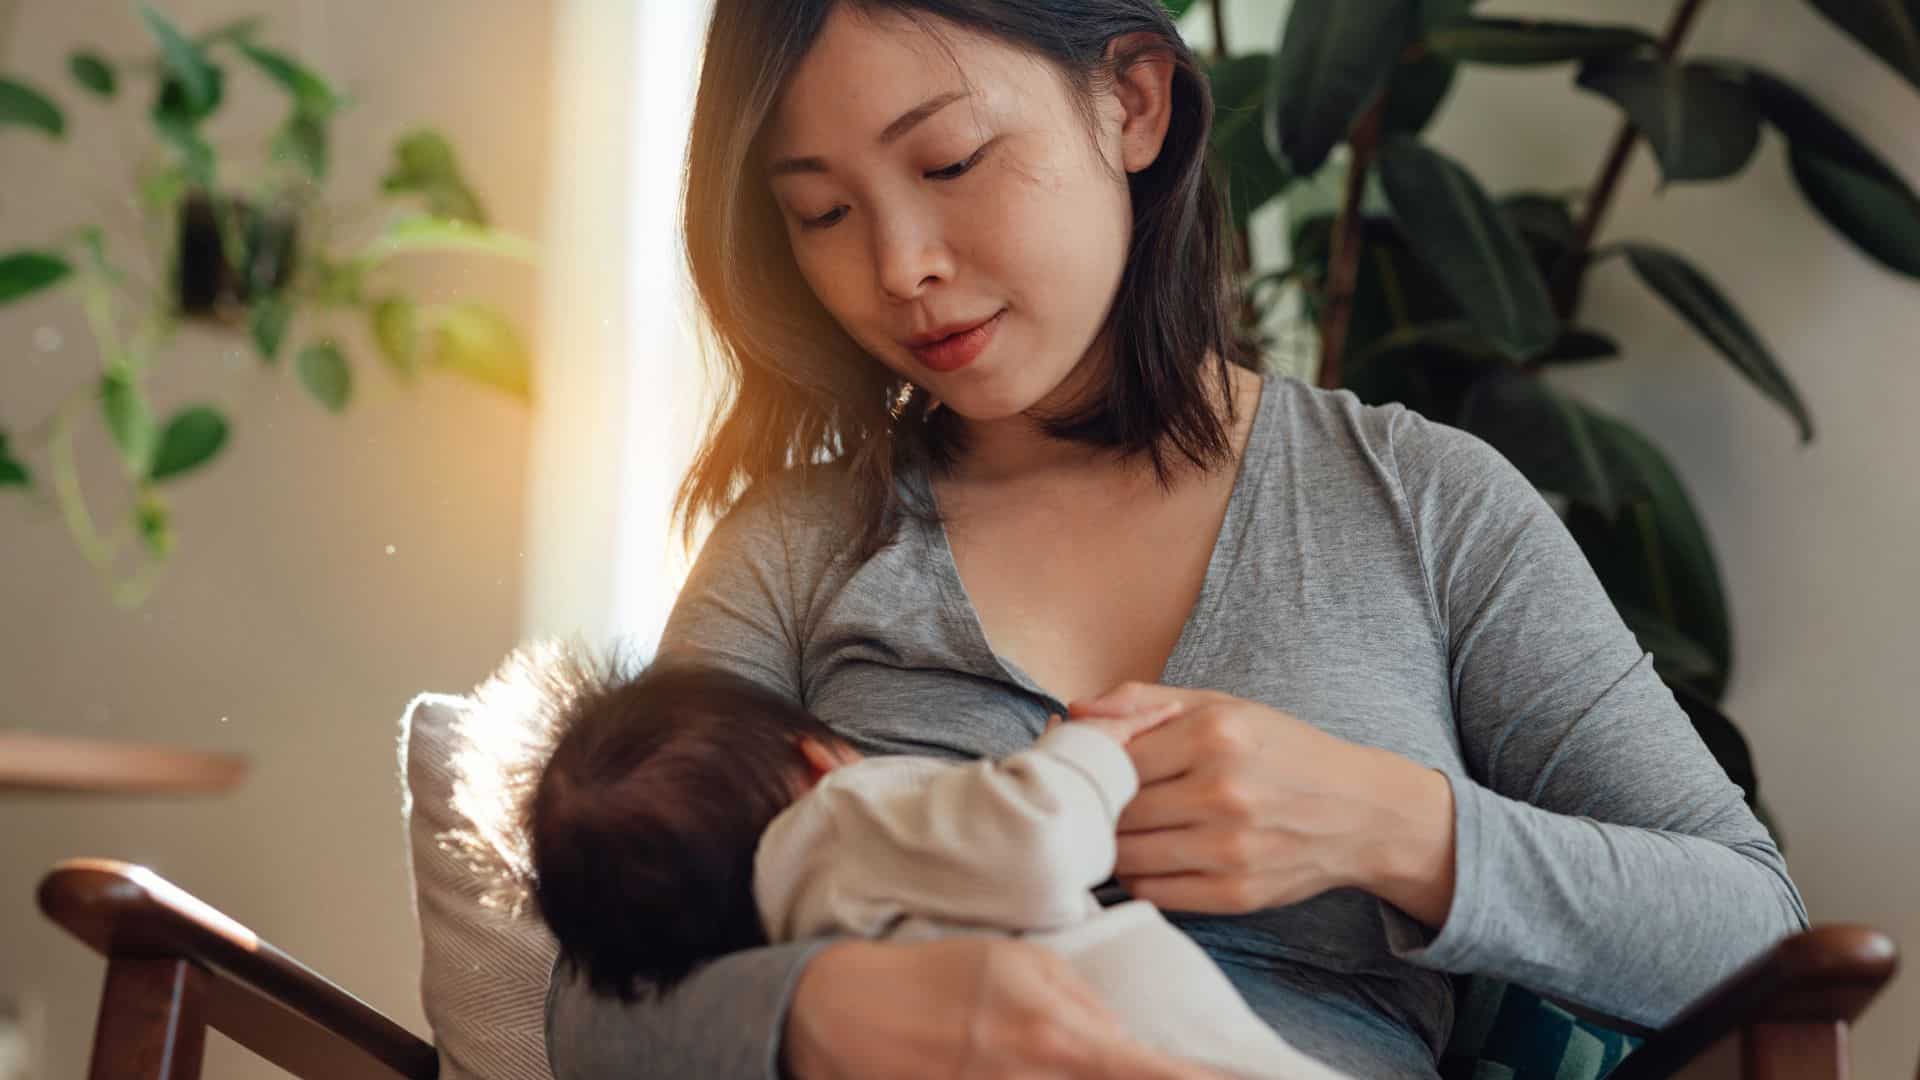 https://www.mother.ly/wp-content/uploads/2022/09/mother-breastfeeding-baby-at-home-regular-breastfeeding-is-helpful-for-mastitis-management.jpg